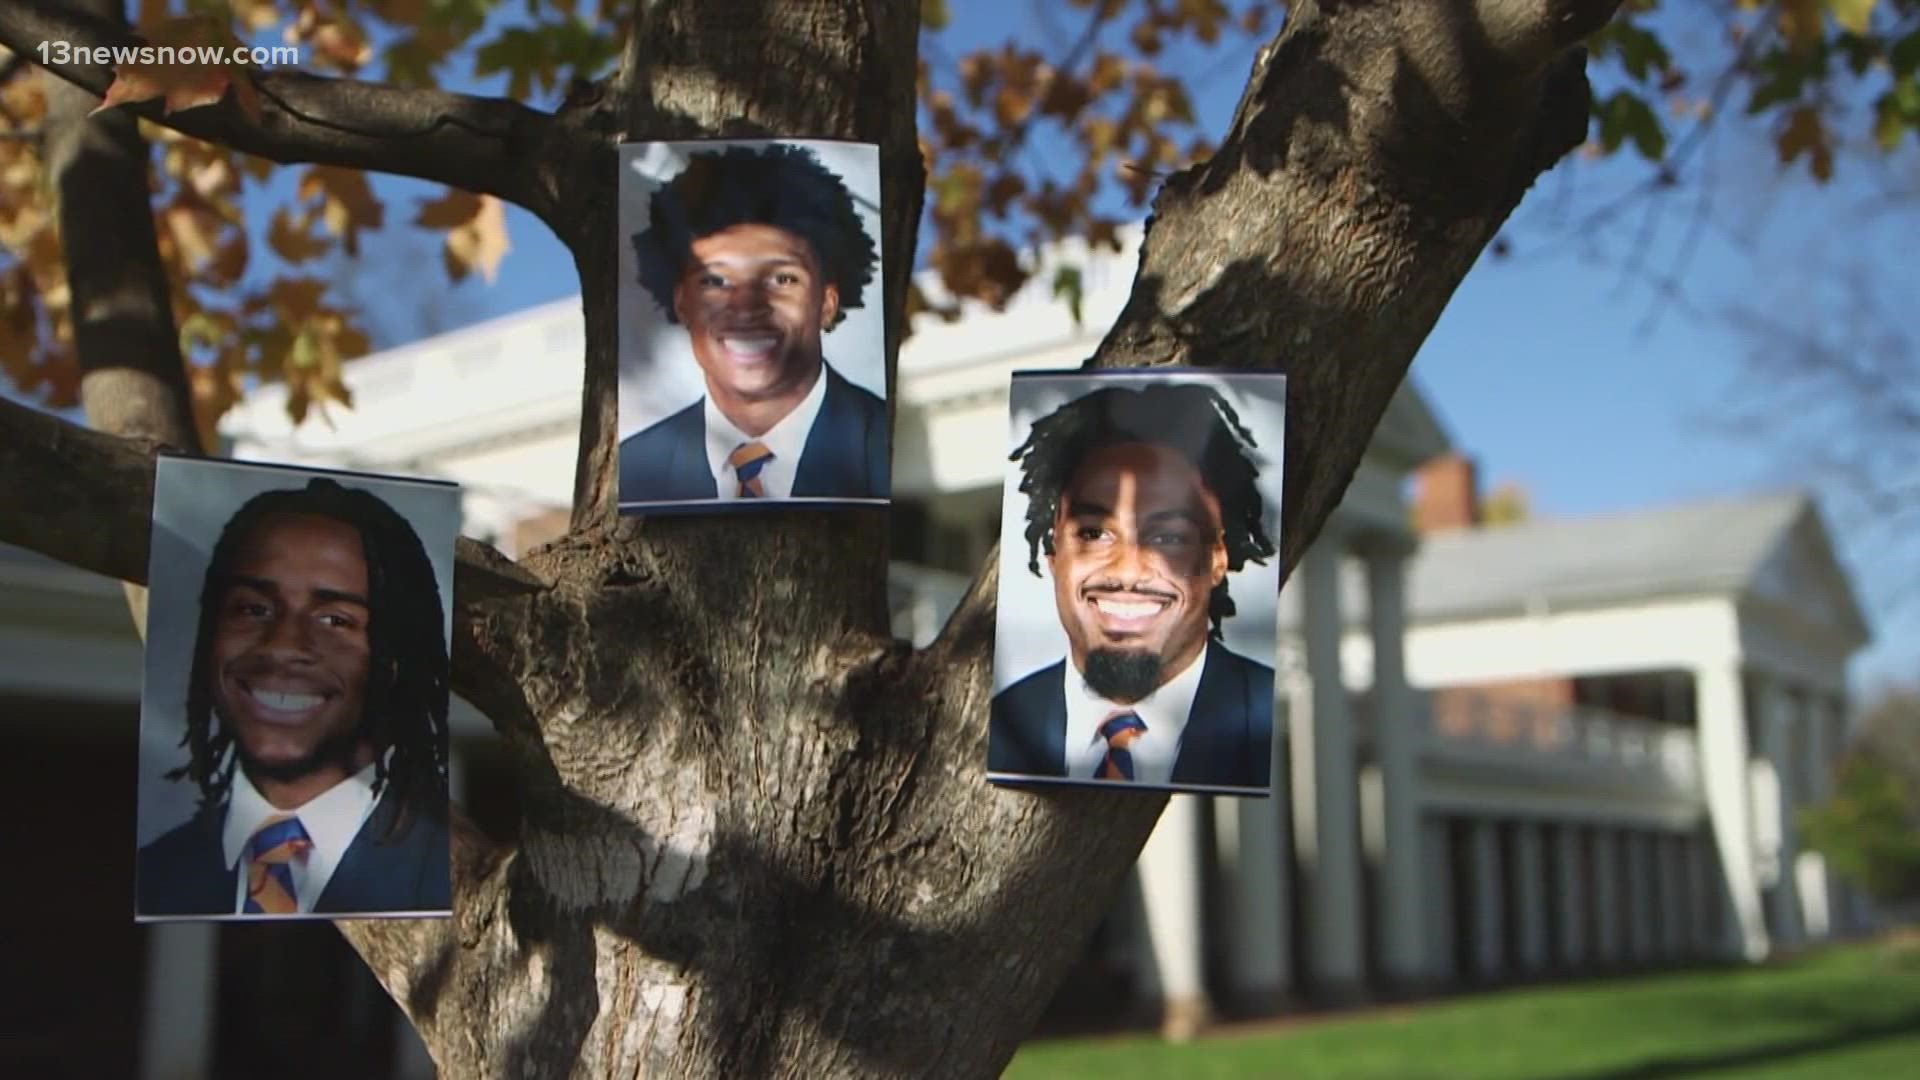 Days after the deadly triple shooting, UVA students took Tuesday as a day to heal.